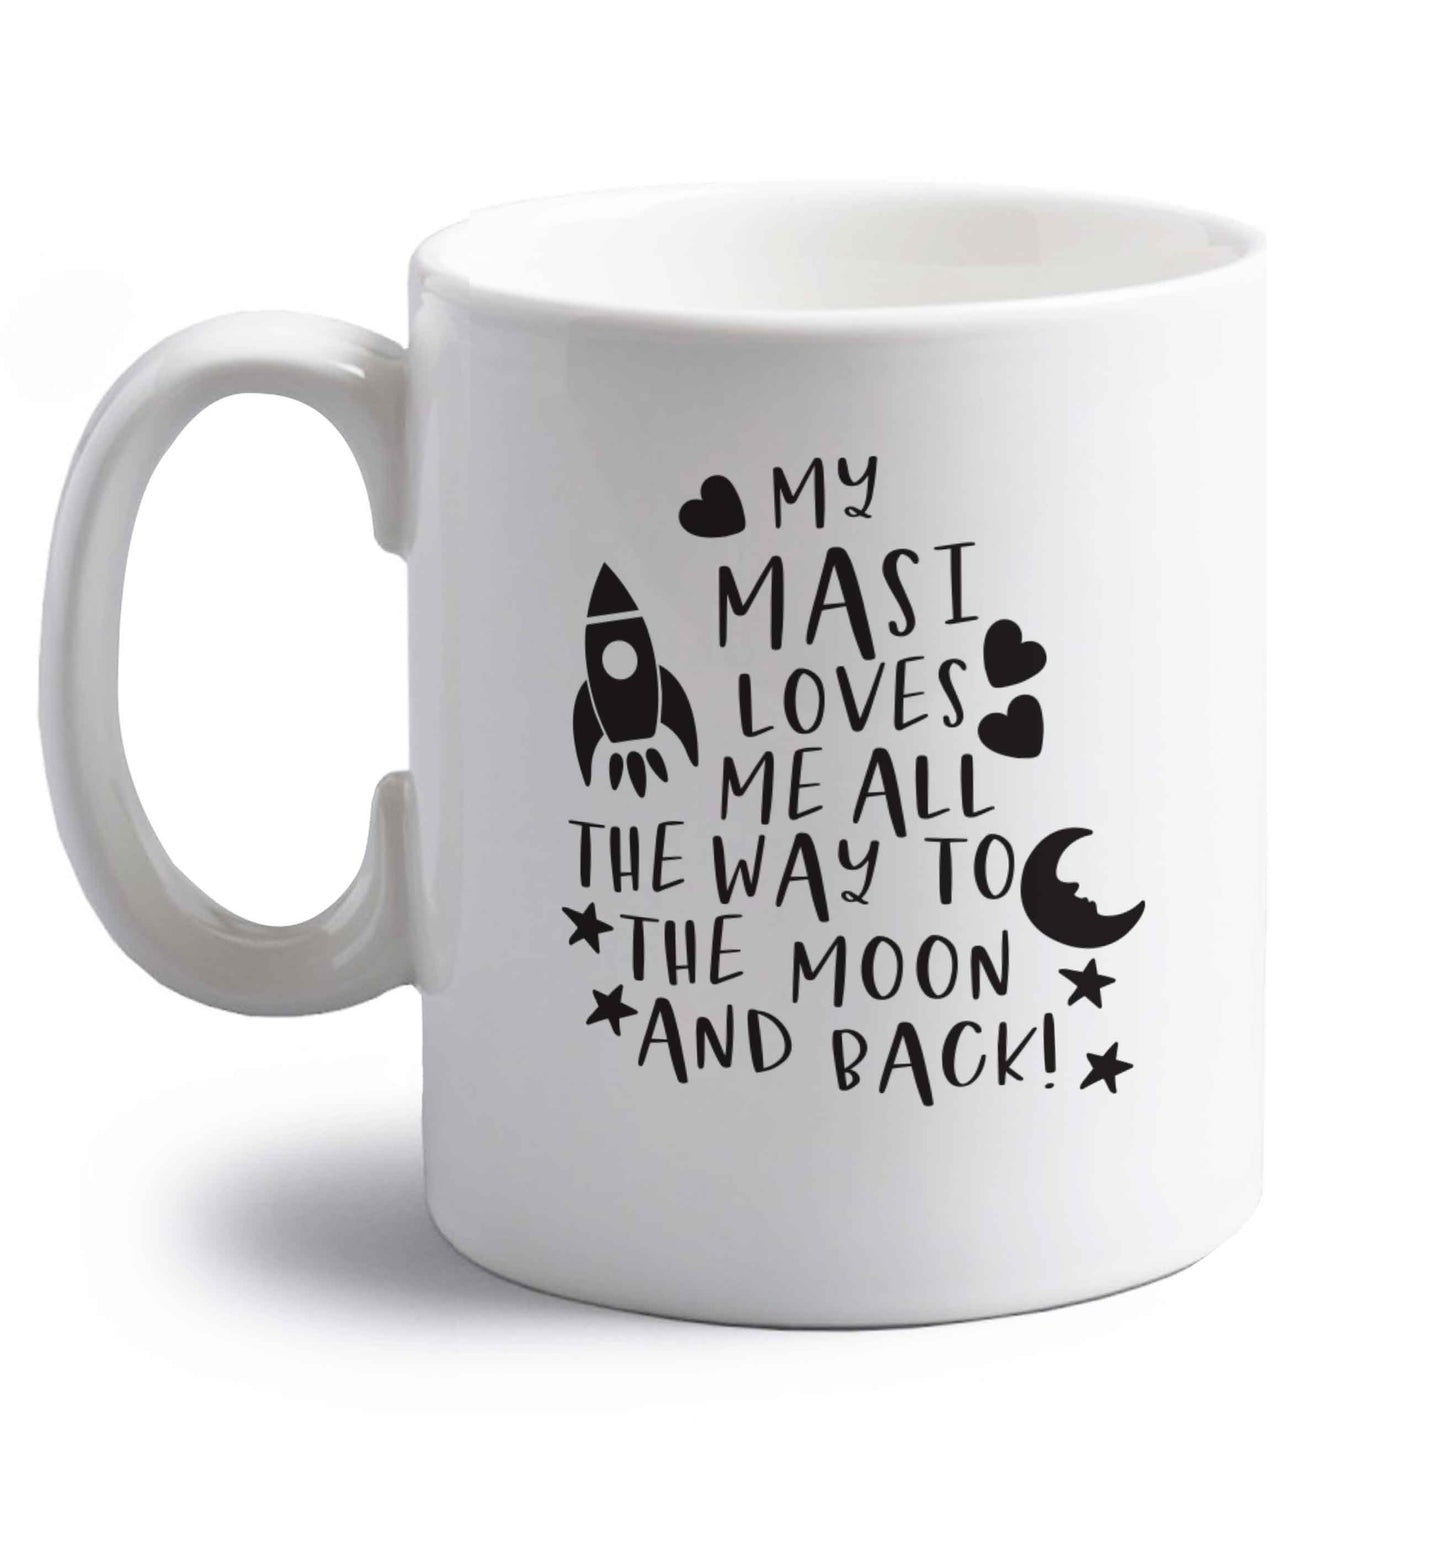 My masi loves me all the way to the moon and back right handed white ceramic mug 